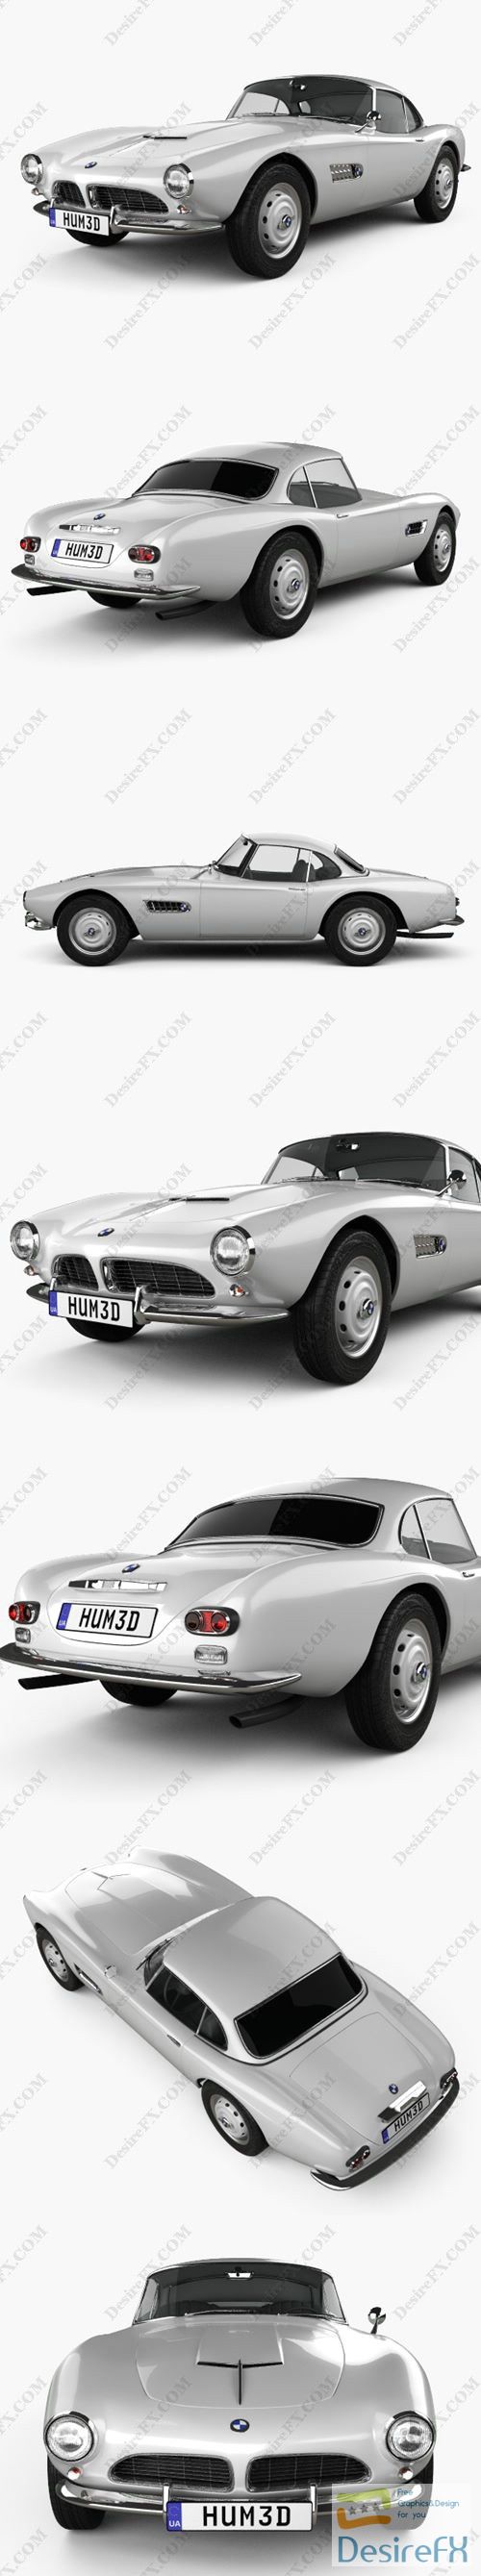 BMW 507 coupe 1959 3D Model